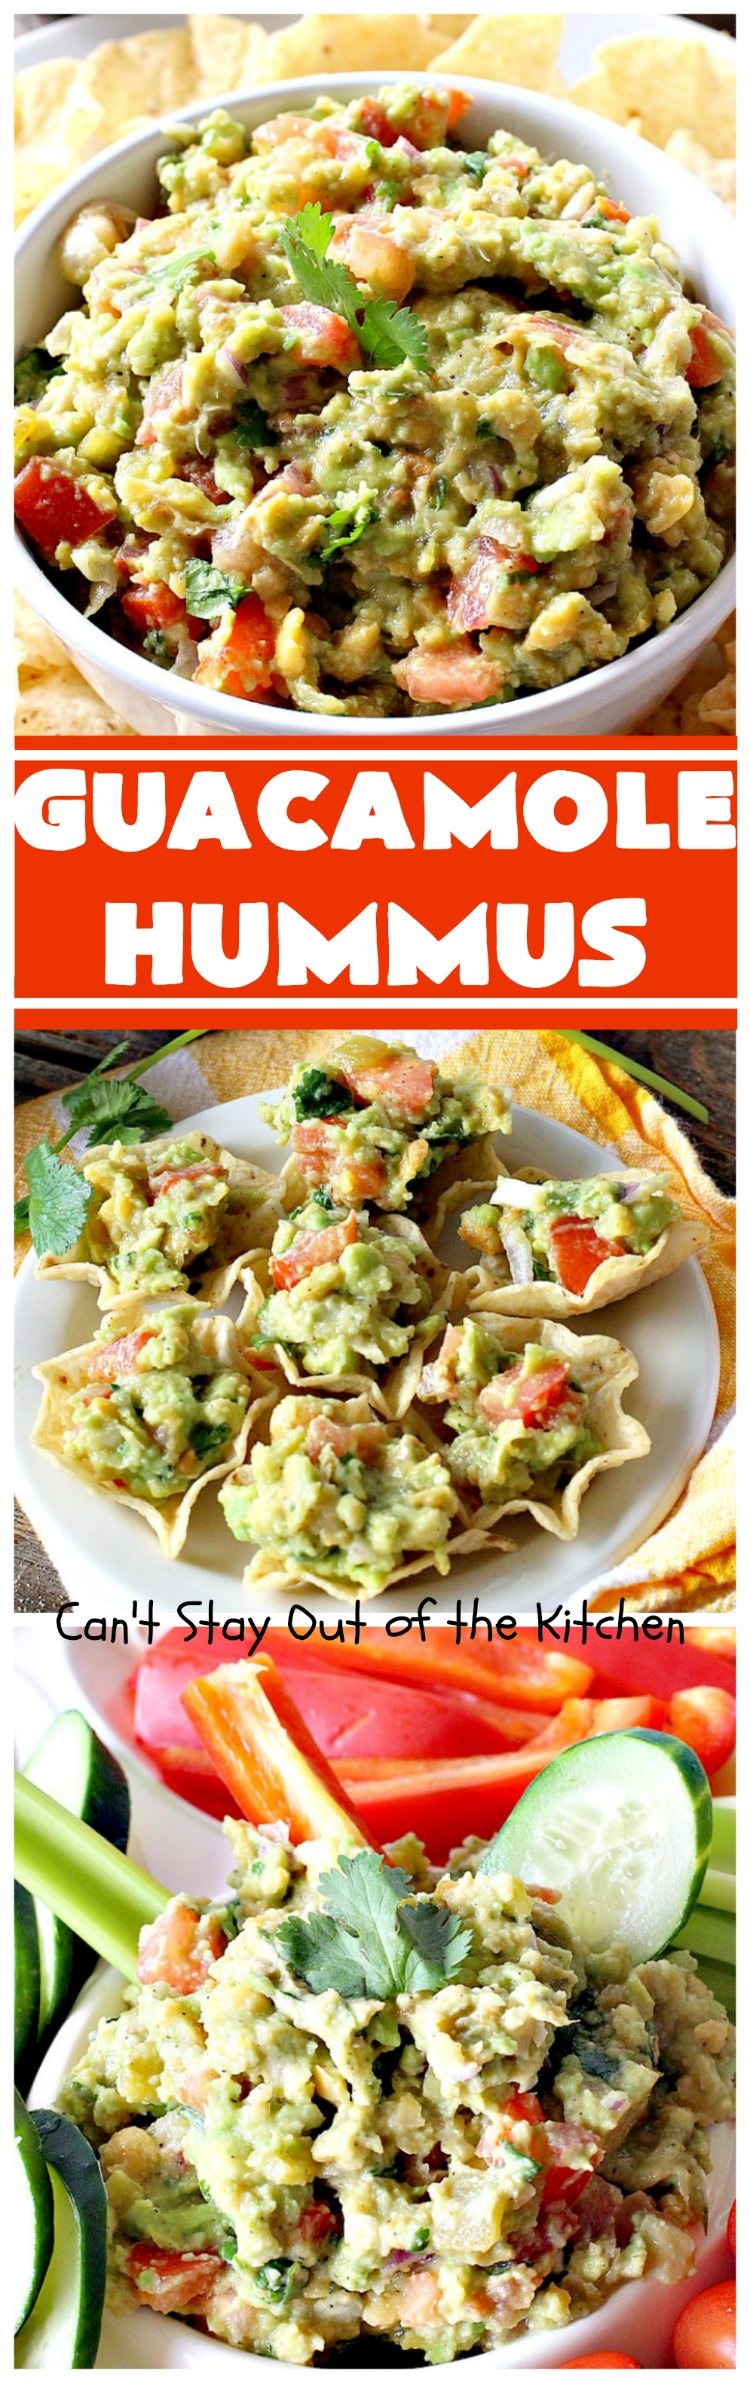 Guacamole Hummus | Can't Stay Out of the Kitchen | this fabulous #appetizer combines the best #guacamole with the best #hummus. It's terrific for #tailgating parties or any potluck.  #avocados #chickpeas #vegan #glutenfree